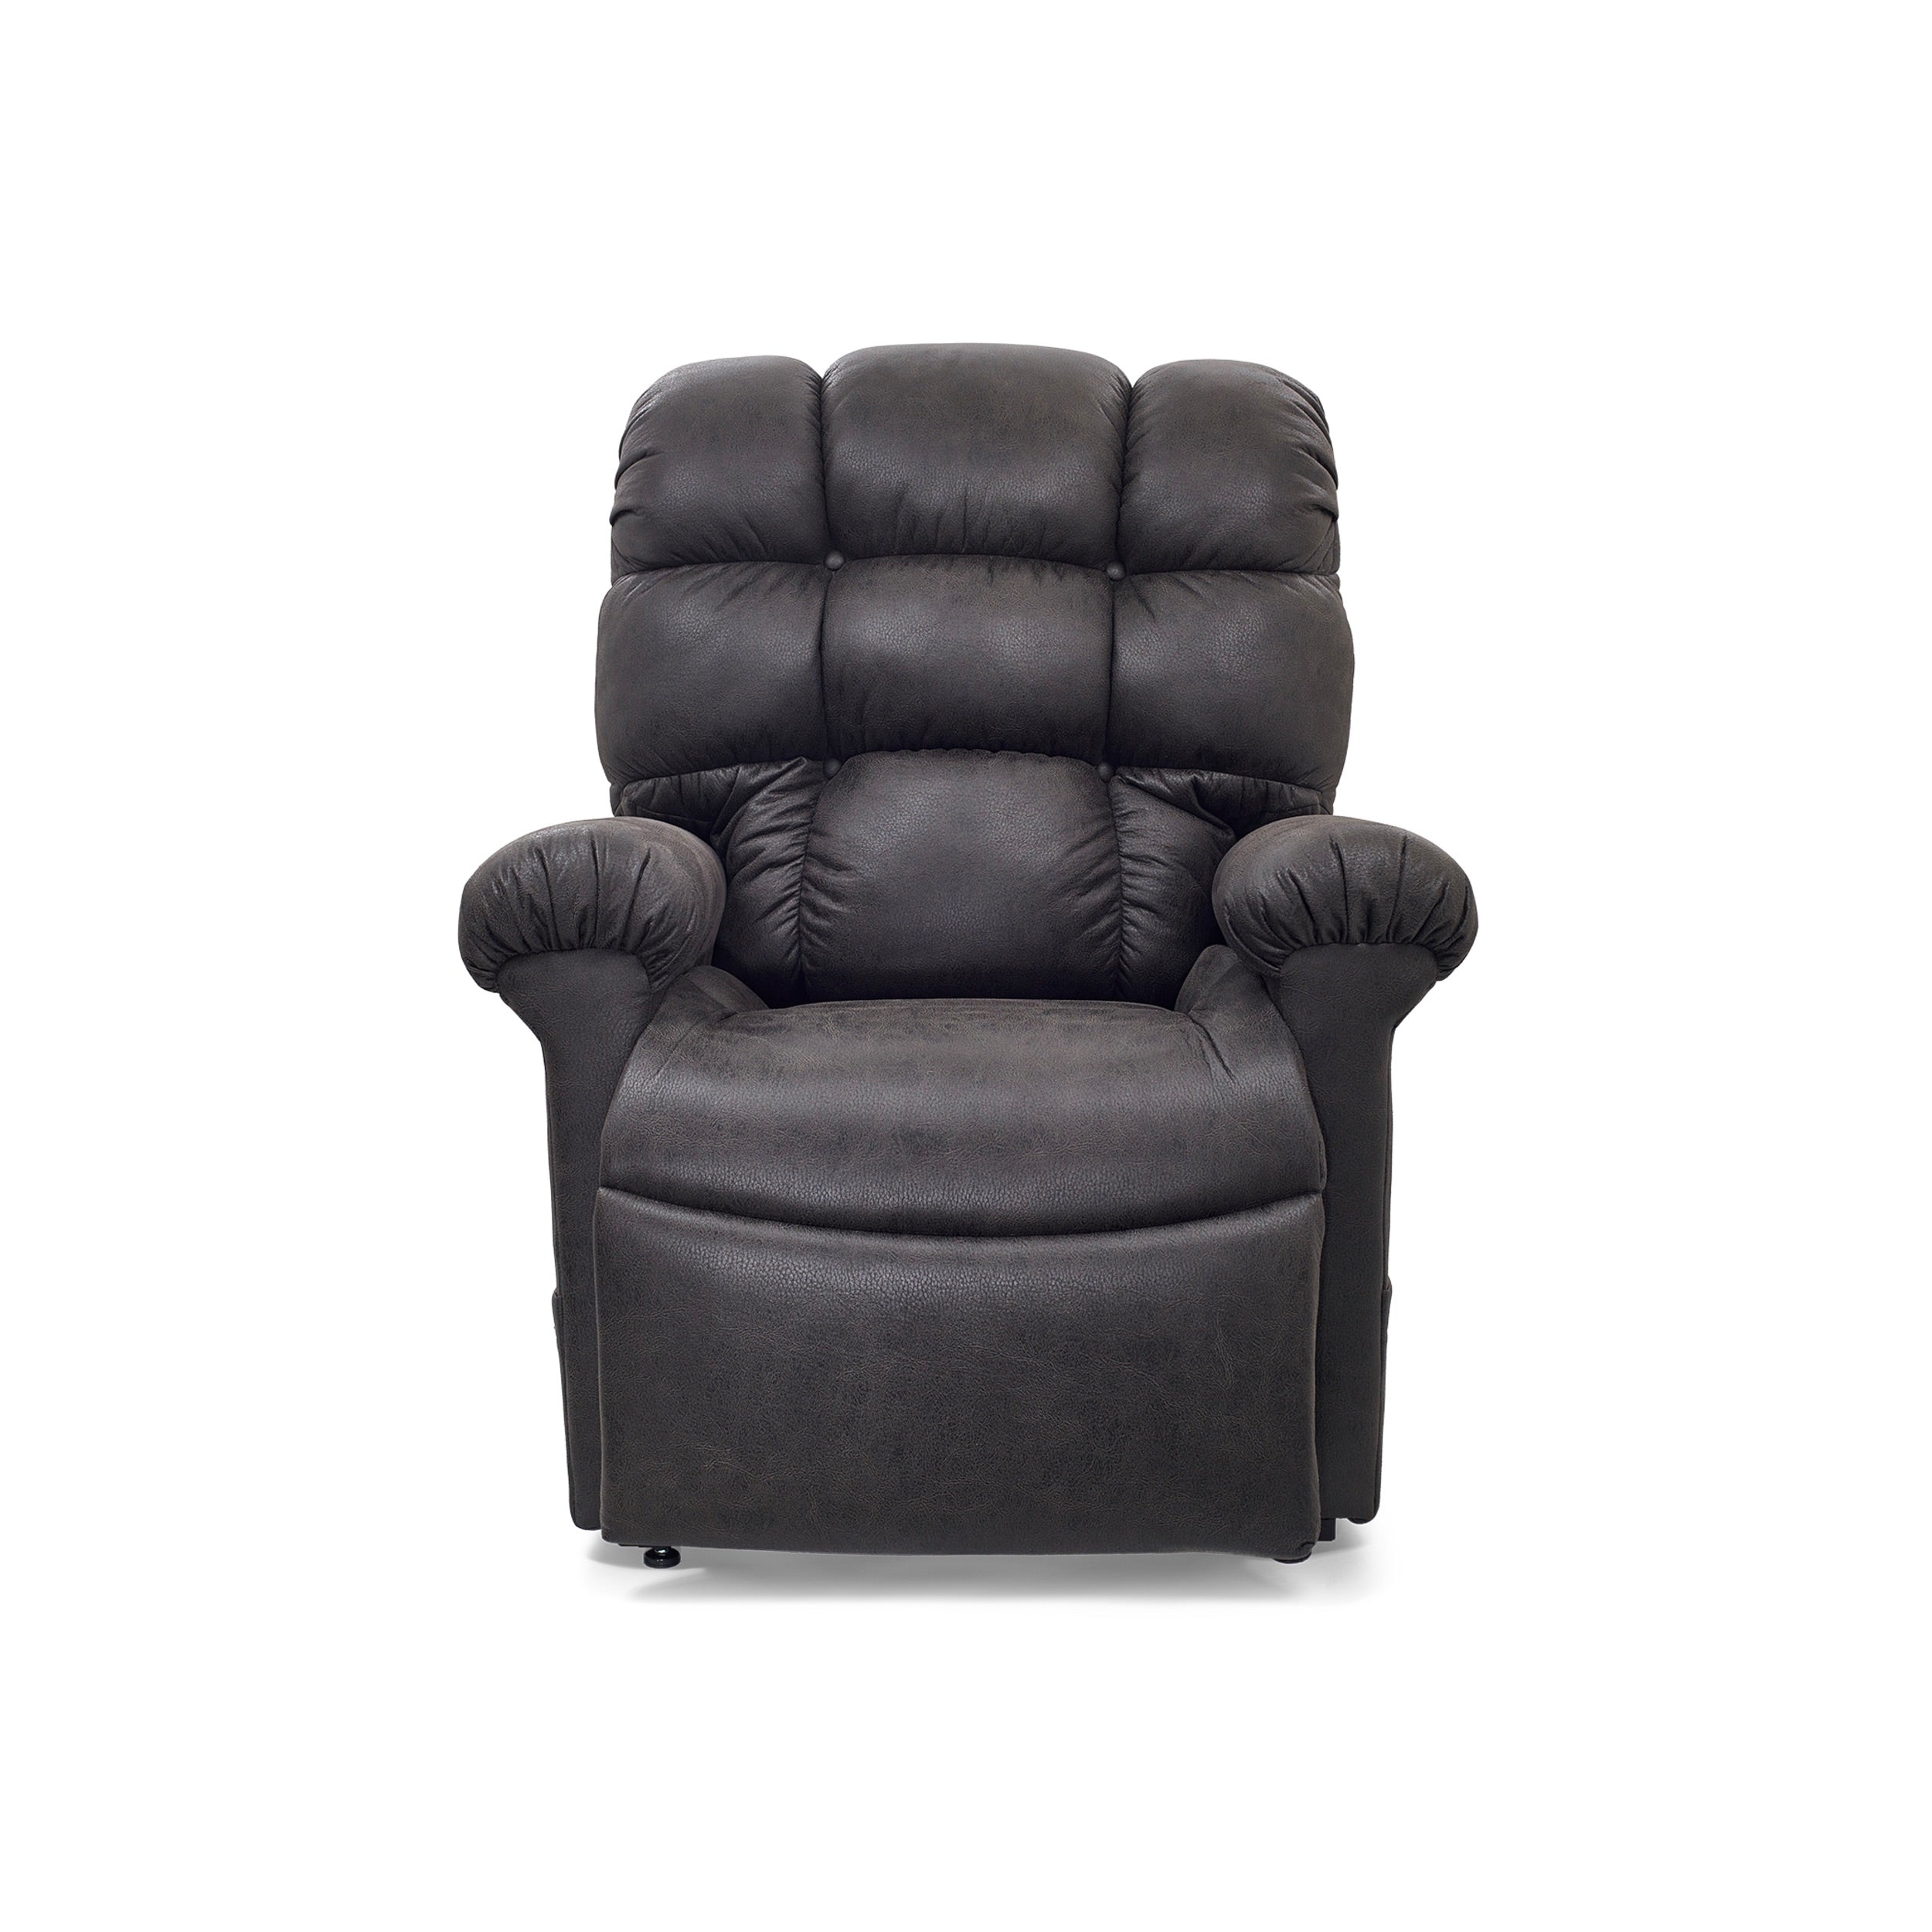 Vega Lift Chair Recliner, smoke color seated, front view